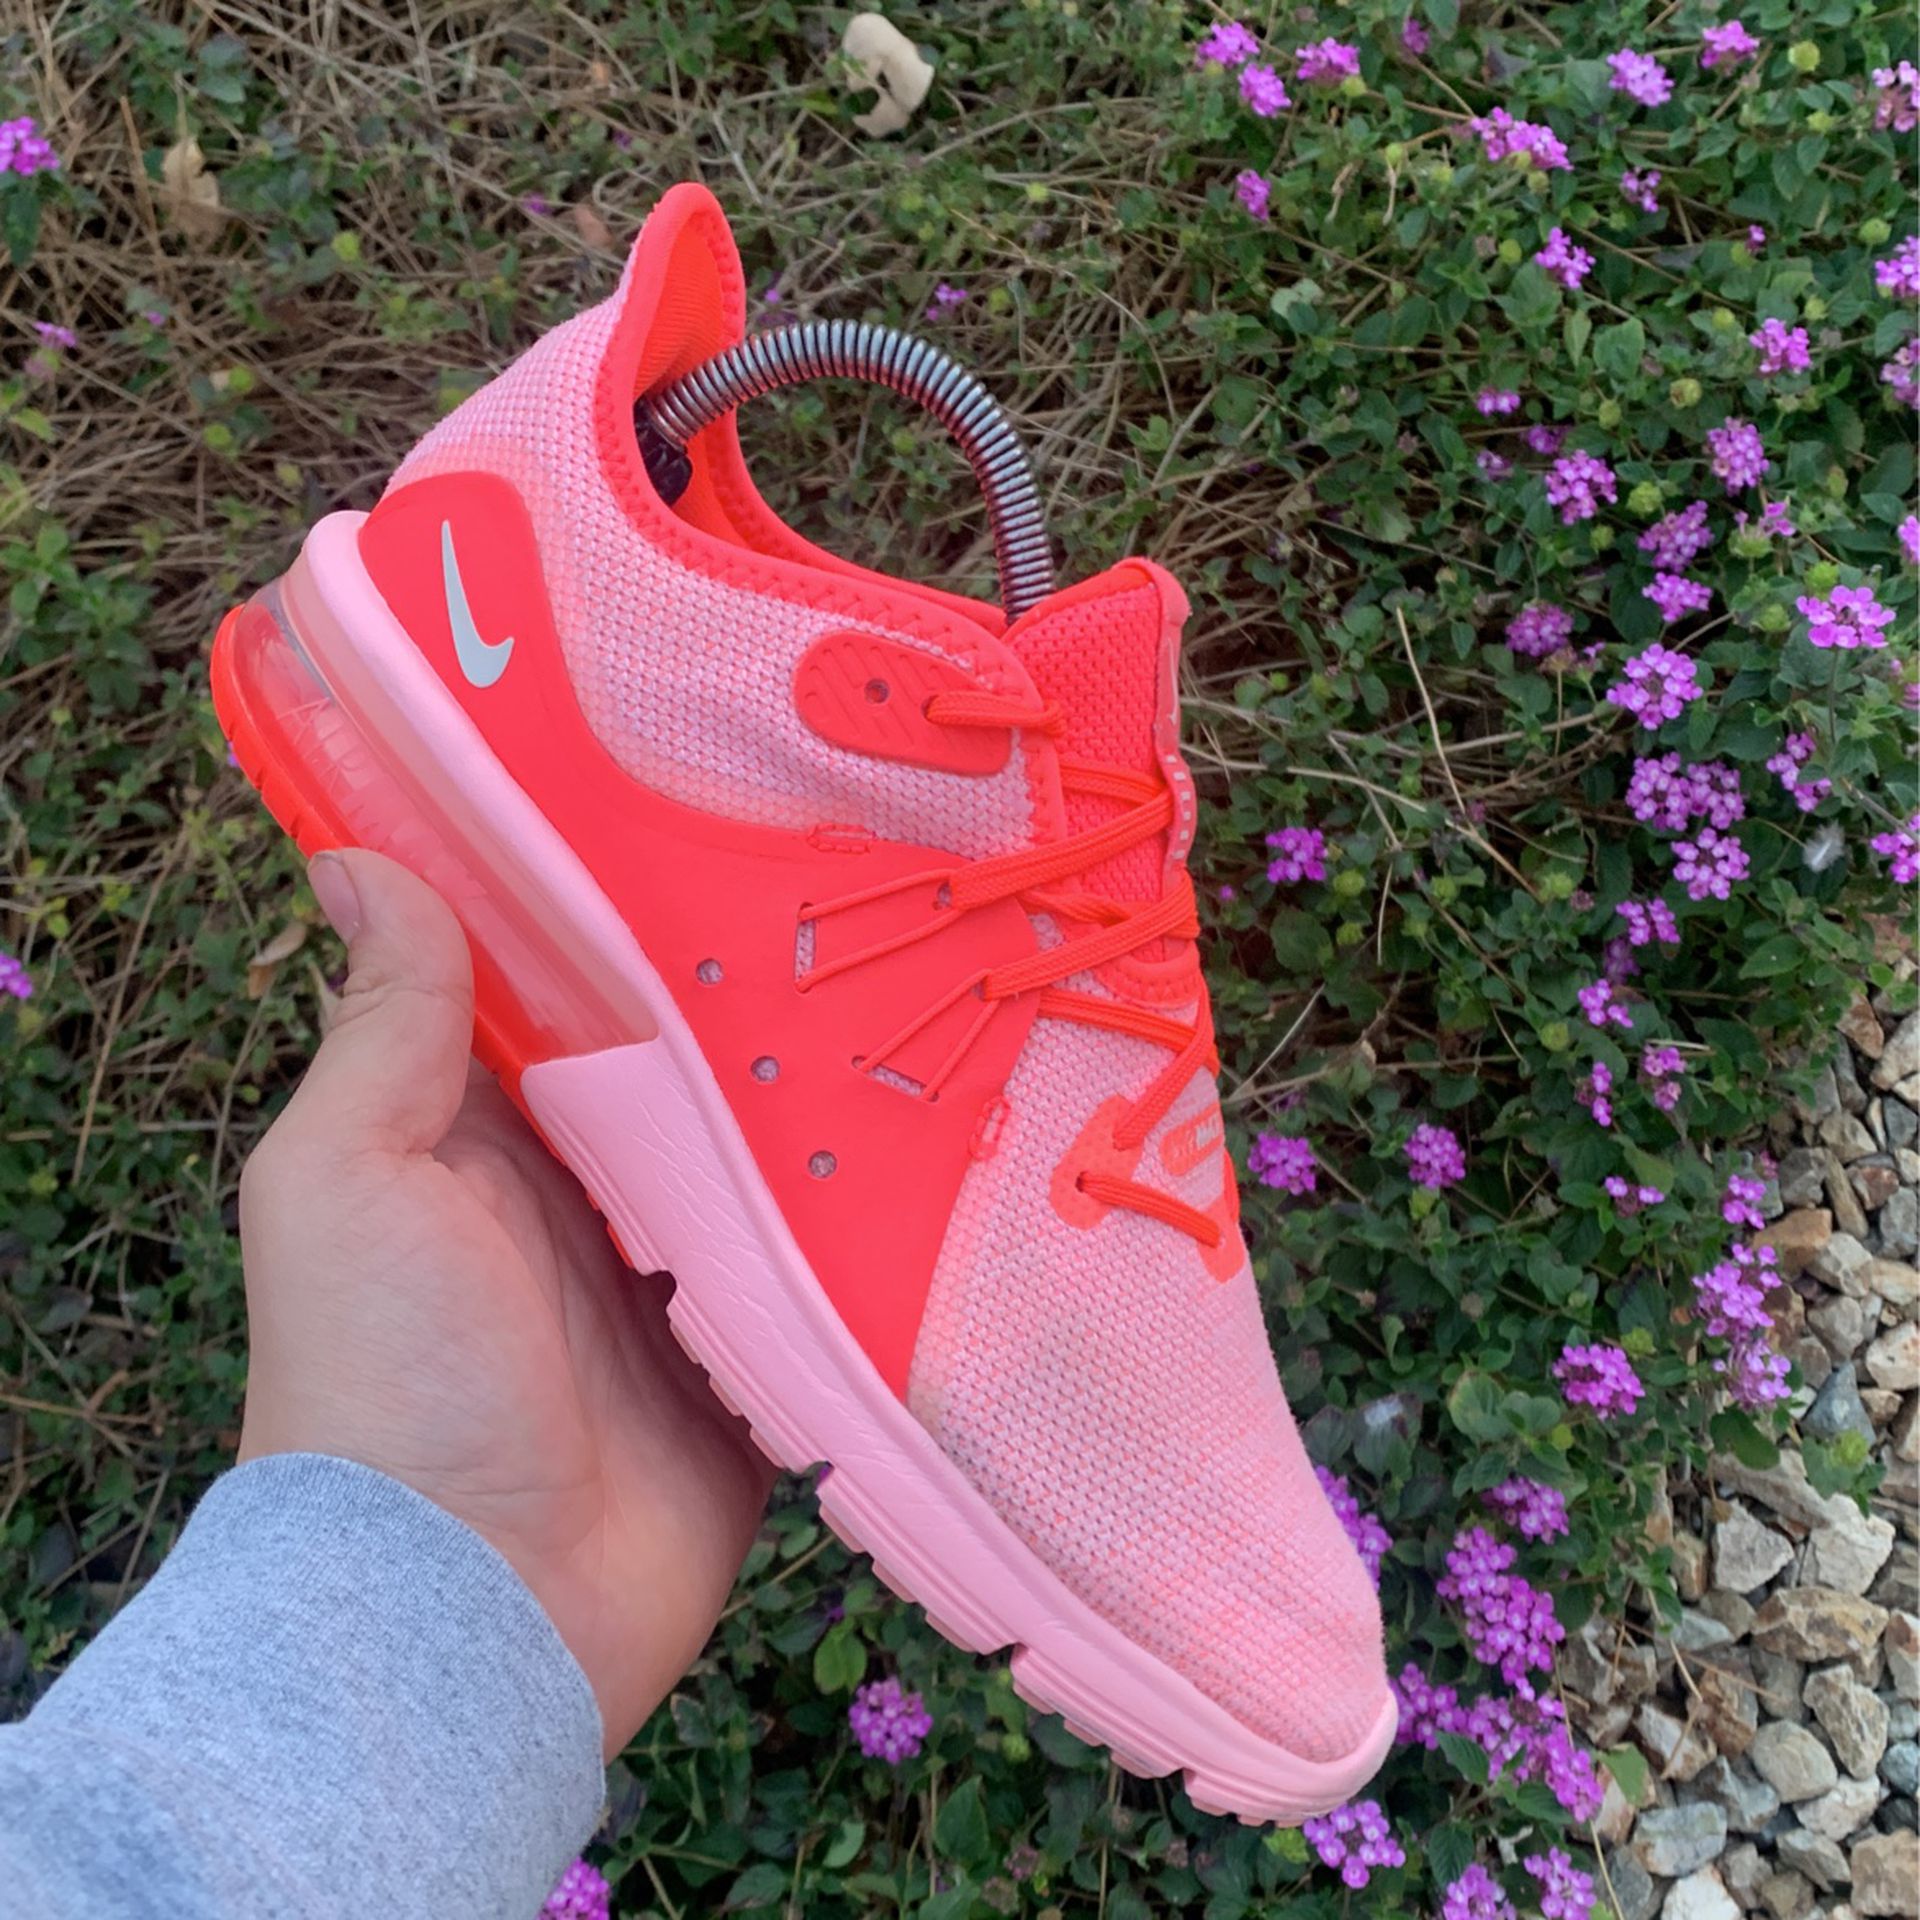 virtueel Voorgevoel herberg Nike Air Max Sequent 3 “Hot Punch” Women's Shoes for Sale in Avondale, AZ -  OfferUp